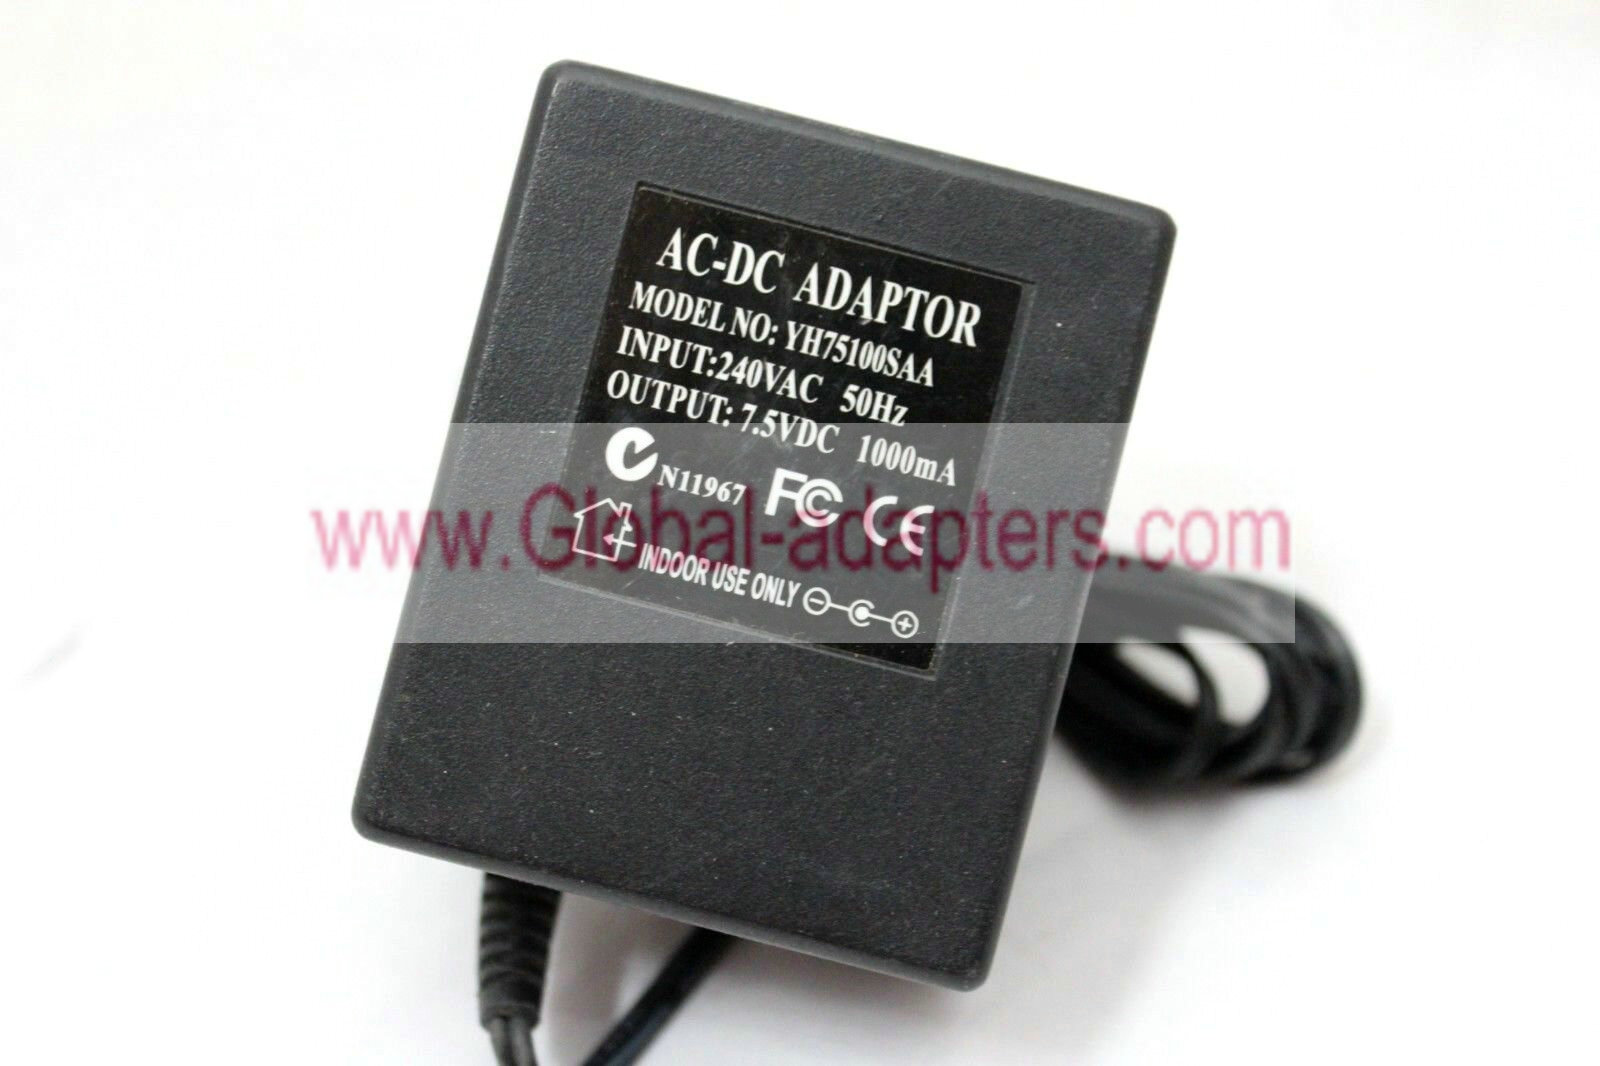 New YH75100SAA 7.5VDC 1000mA AC/DC Adapter Charger